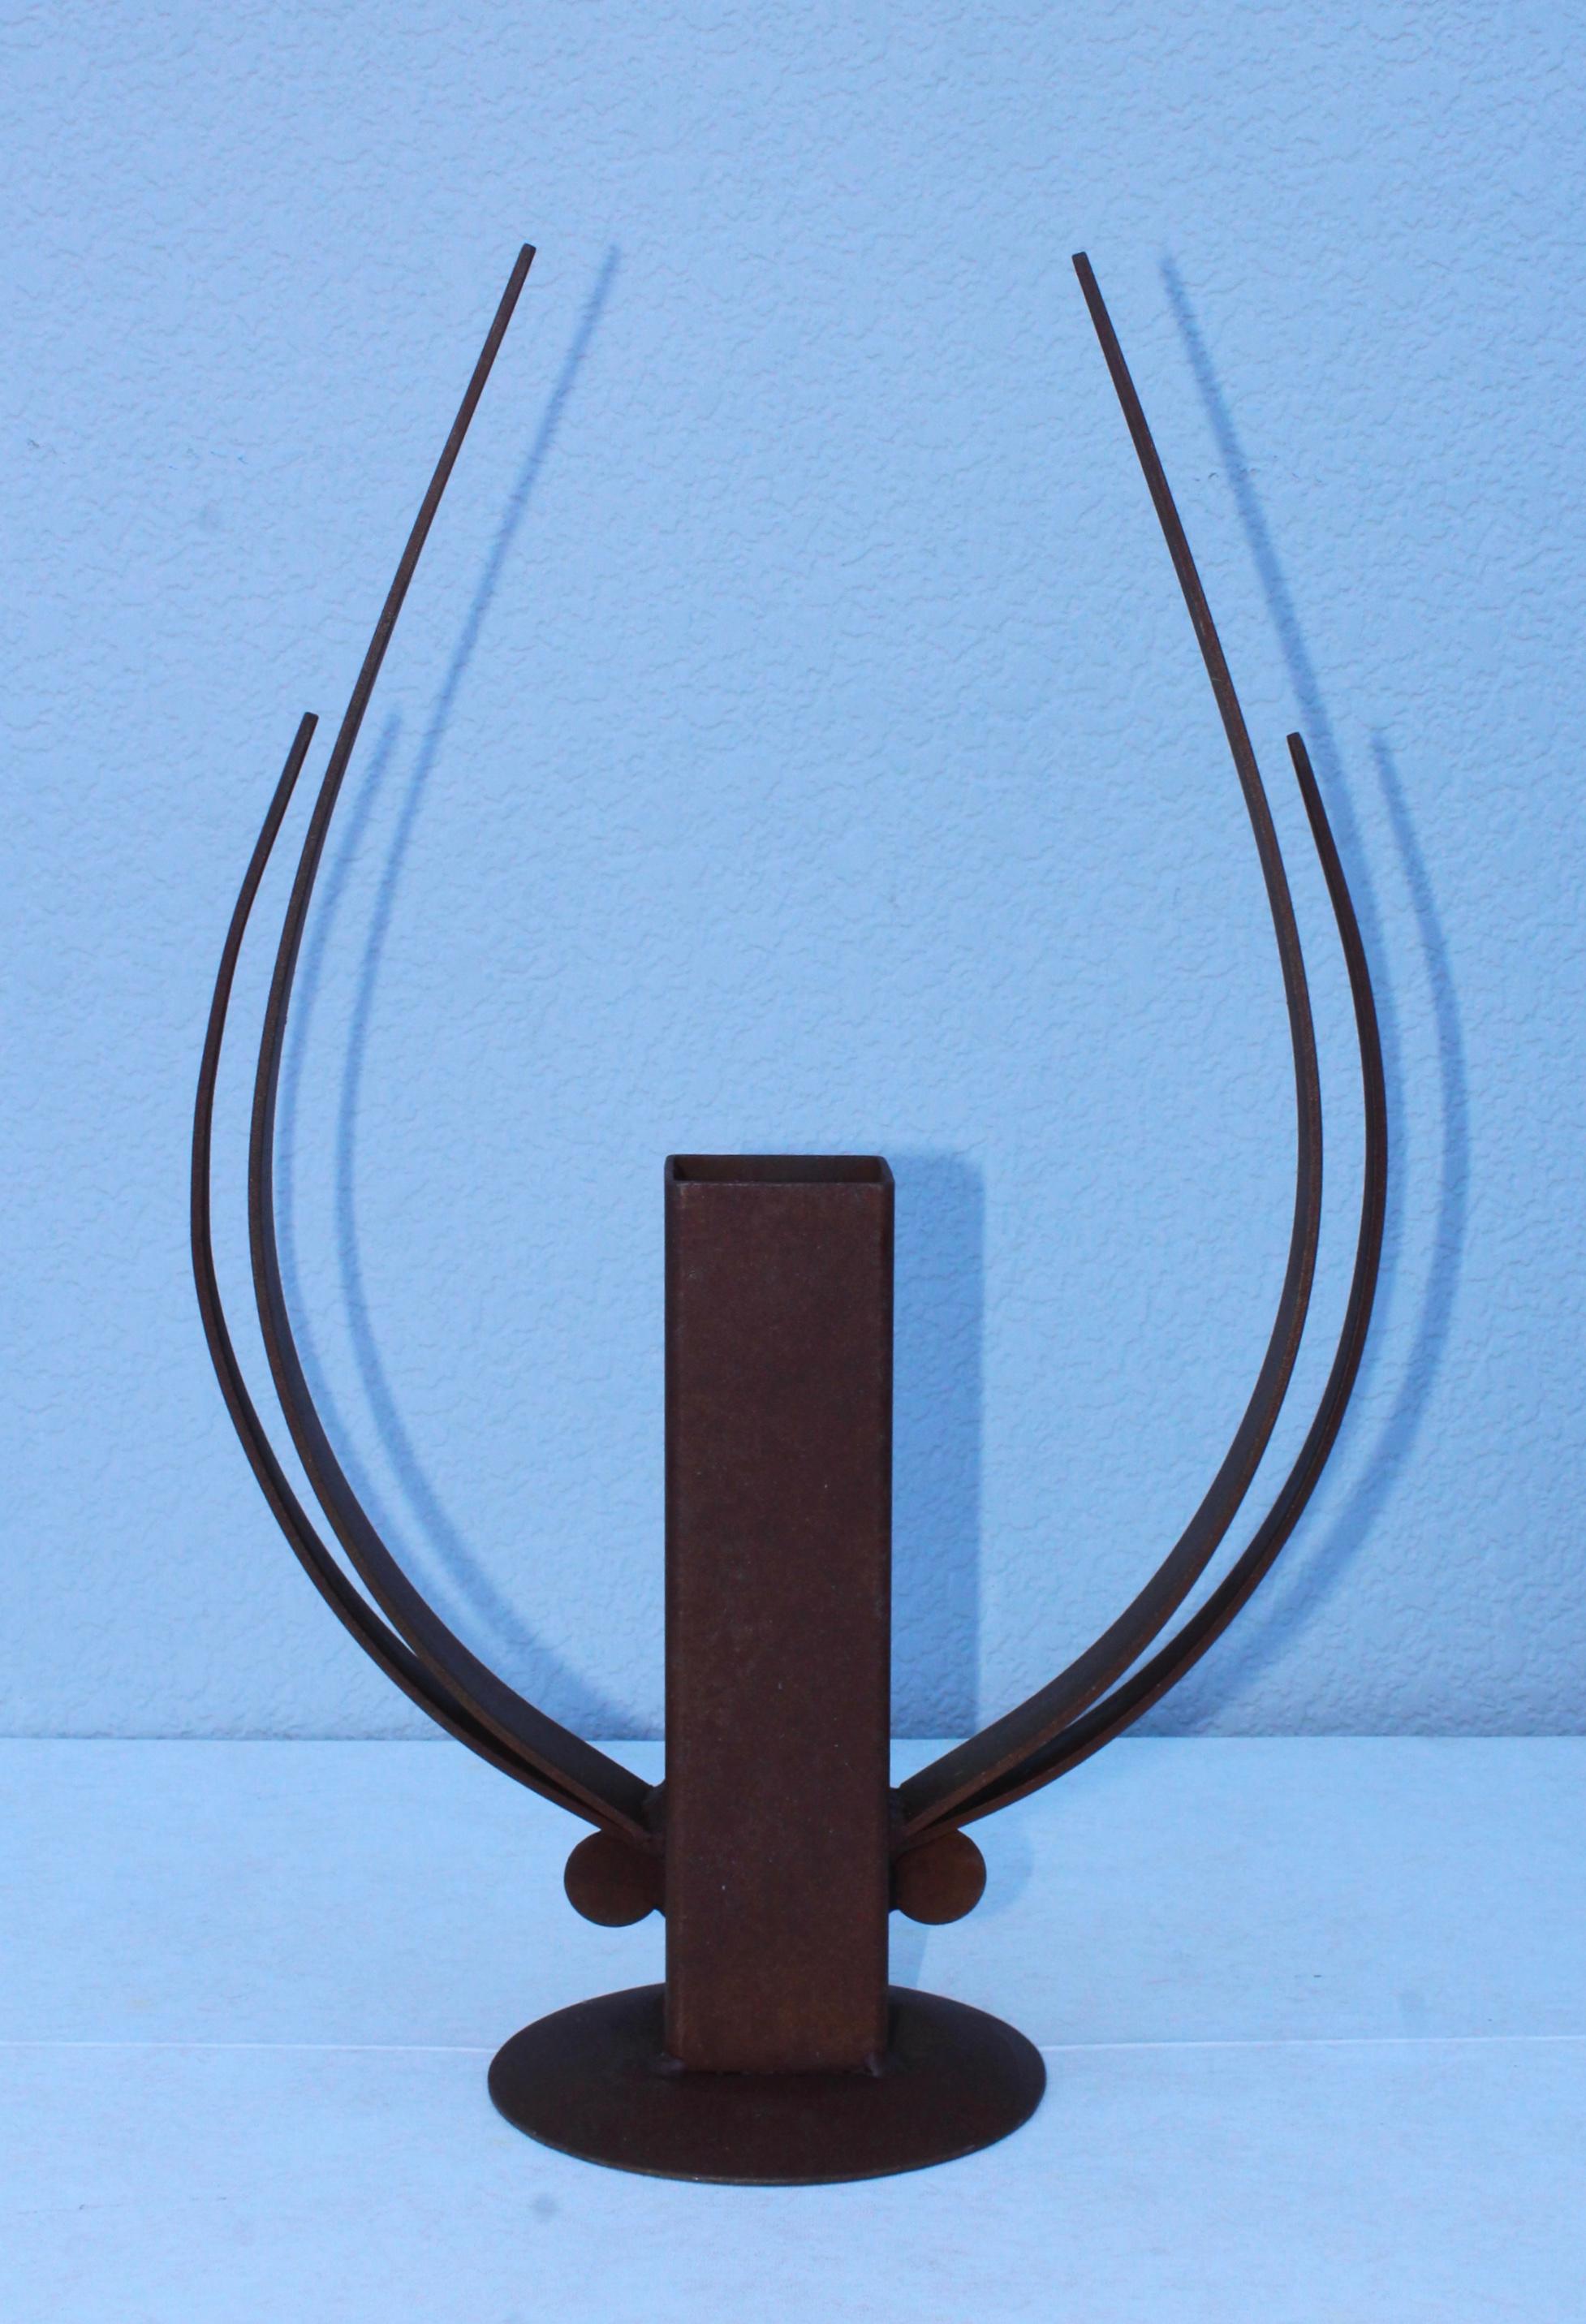 Mid-Century Modern rusted steel indoor or outdoor table sculpture. Signed and dated on the bottom.